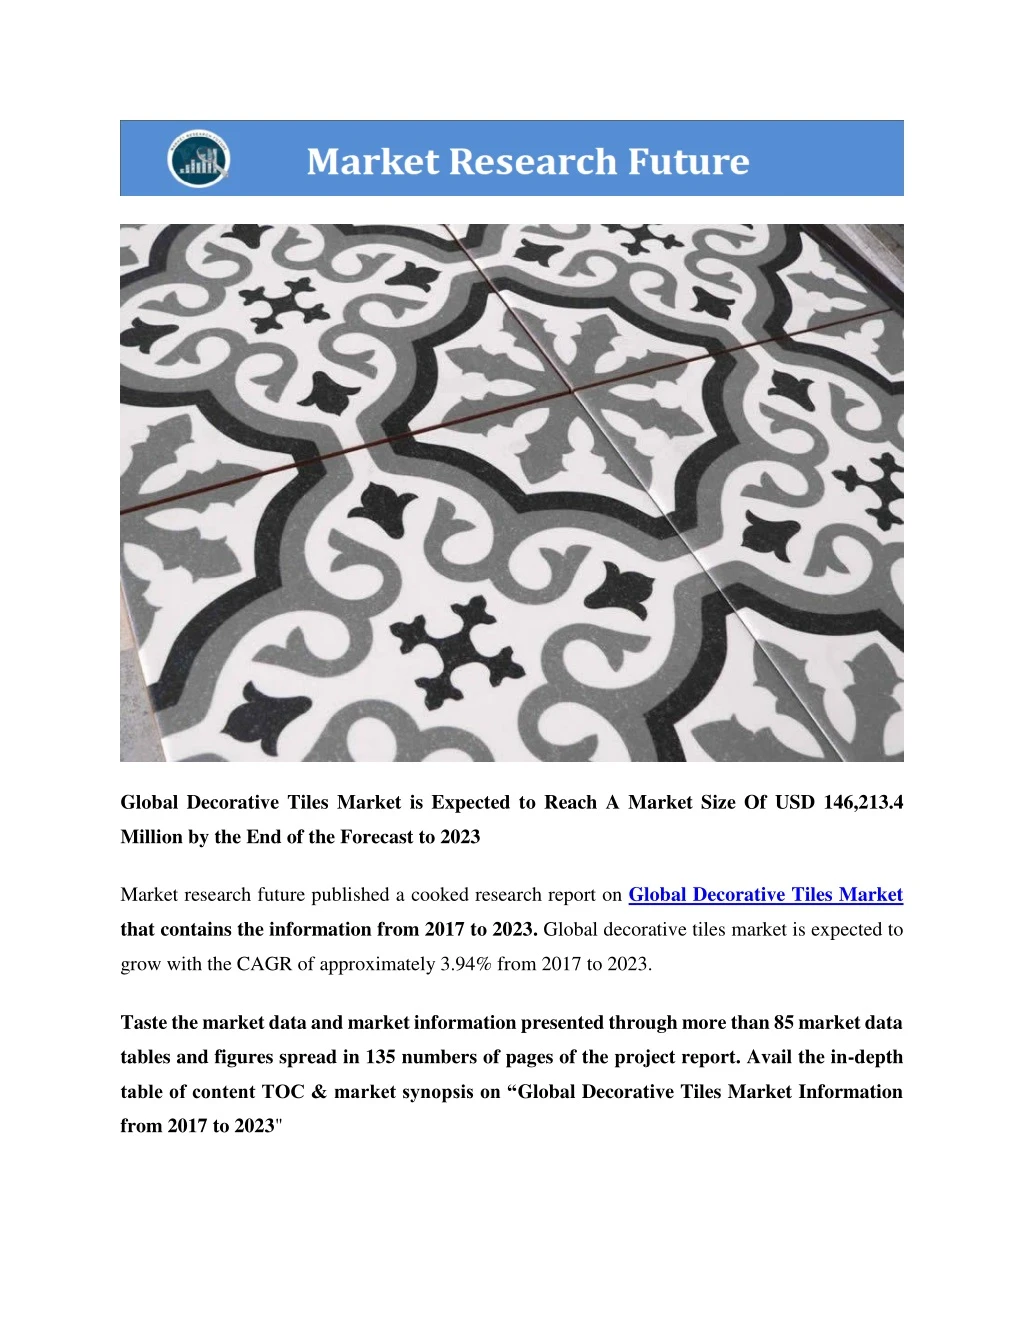 global decorative tiles market is expected